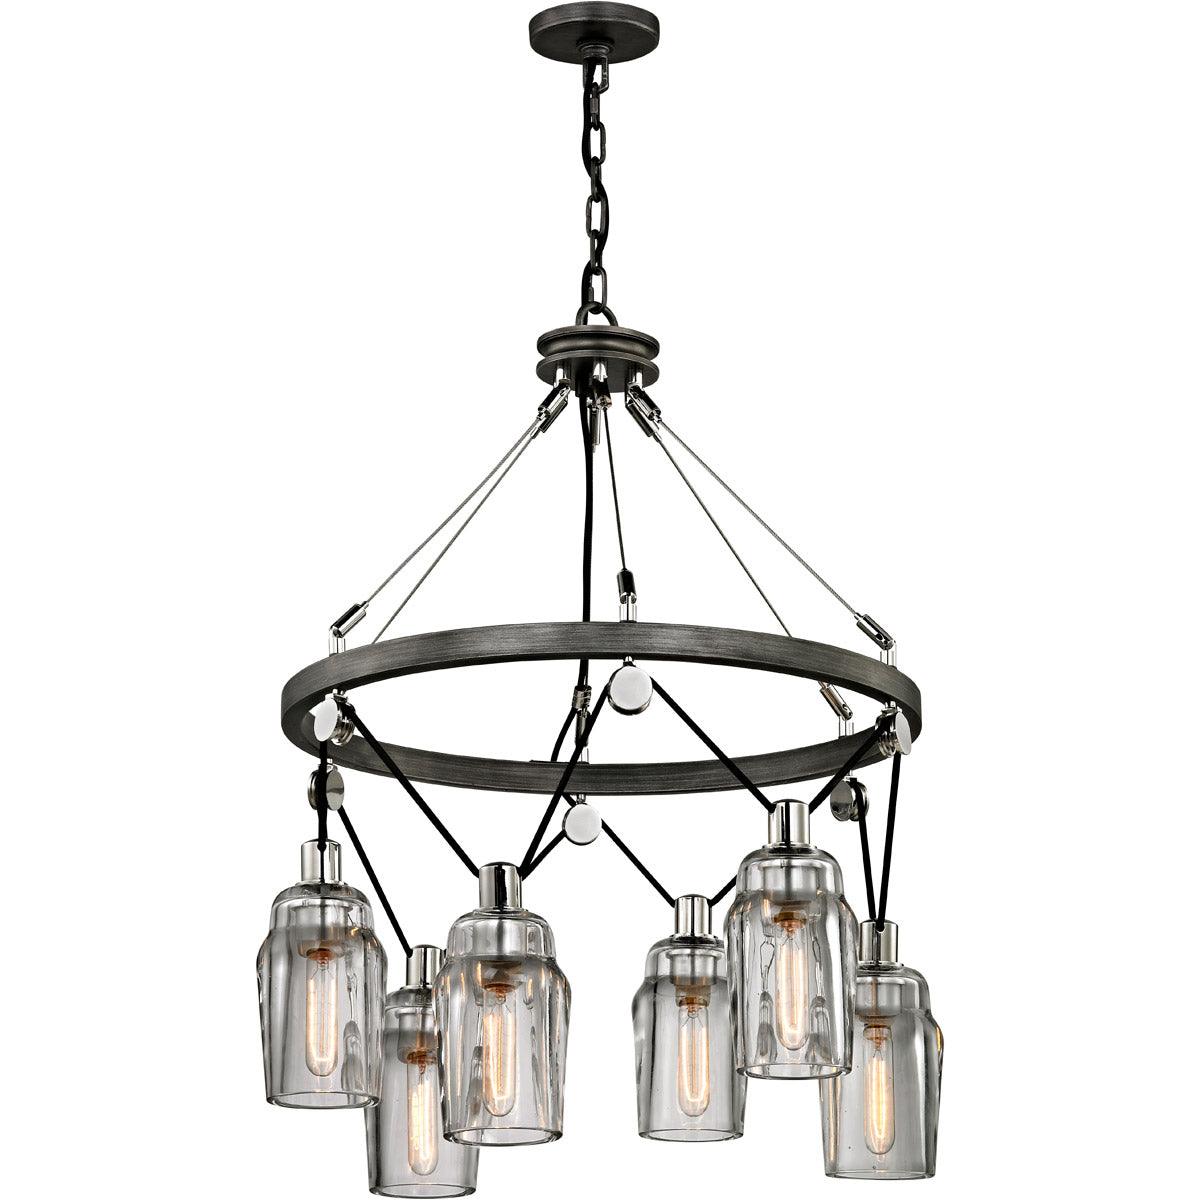 Graphite and Polished Nickel with Clear Pressed Glass Shade Round Pendant - LV LIGHTING